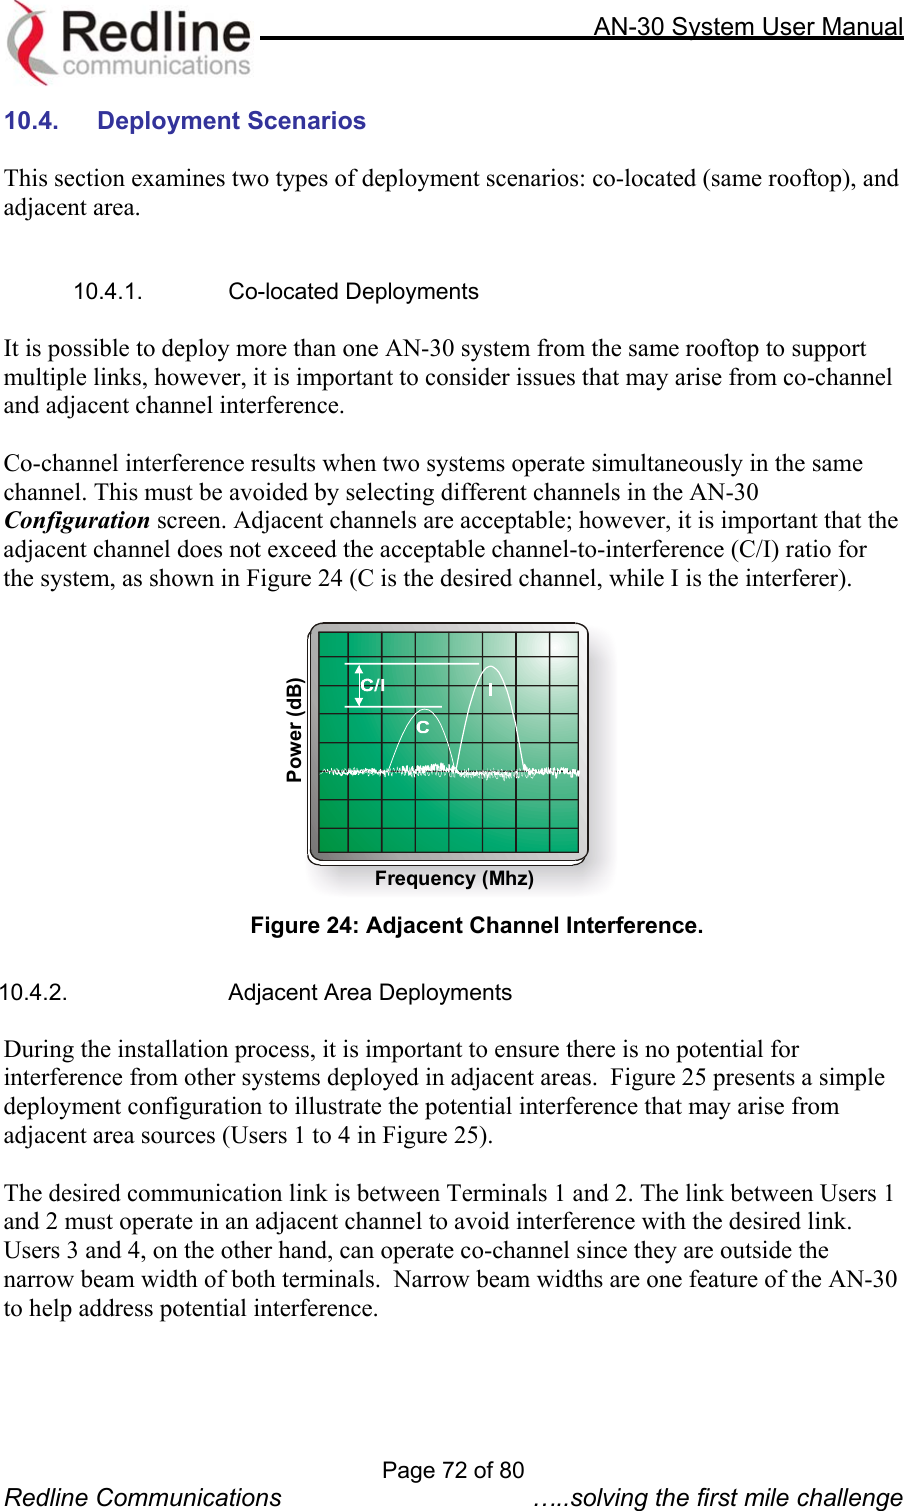     AN-30 System User Manual  10.4. Deployment Scenarios  This section examines two types of deployment scenarios: co-located (same rooftop), and adjacent area.    10.4.1. Co-located Deployments  It is possible to deploy more than one AN-30 system from the same rooftop to support multiple links, however, it is important to consider issues that may arise from co-channel and adjacent channel interference.  Co-channel interference results when two systems operate simultaneously in the same channel. This must be avoided by selecting different channels in the AN-30 Configuration screen. Adjacent channels are acceptable; however, it is important that the adjacent channel does not exceed the acceptable channel-to-interference (C/I) ratio for the system, as shown in Figure 24 (C is the desired channel, while I is the interferer).   Frequency (Mhz)Power (dB) Figure 24: Adjacent Channel Interference.  10.4.2.  Adjacent Area Deployments  During the installation process, it is important to ensure there is no potential for interference from other systems deployed in adjacent areas.  Figure 25 presents a simple deployment configuration to illustrate the potential interference that may arise from adjacent area sources (Users 1 to 4 in Figure 25).   The desired communication link is between Terminals 1 and 2. The link between Users 1 and 2 must operate in an adjacent channel to avoid interference with the desired link.  Users 3 and 4, on the other hand, can operate co-channel since they are outside the narrow beam width of both terminals.  Narrow beam widths are one feature of the AN-30 to help address potential interference.  Page 72 of 80 Redline Communications  …..solving the first mile challenge 